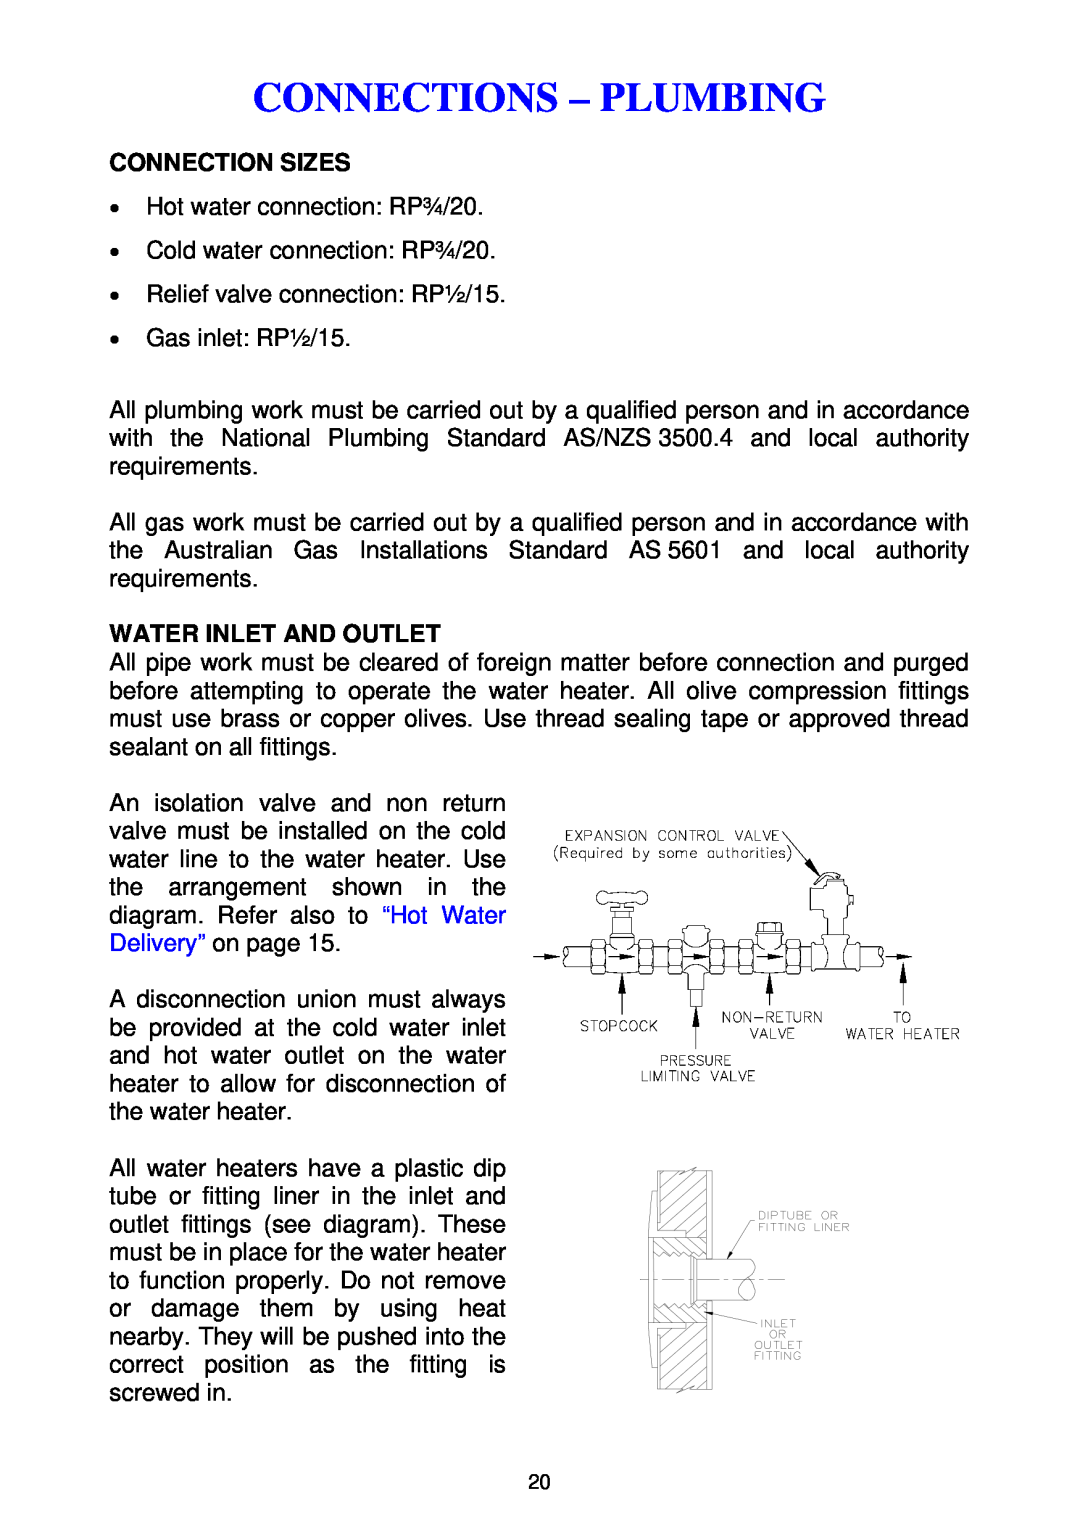 Rheem 300 series installation instructions Connections - Plumbing, Connection Sizes, Water Inlet And Outlet 